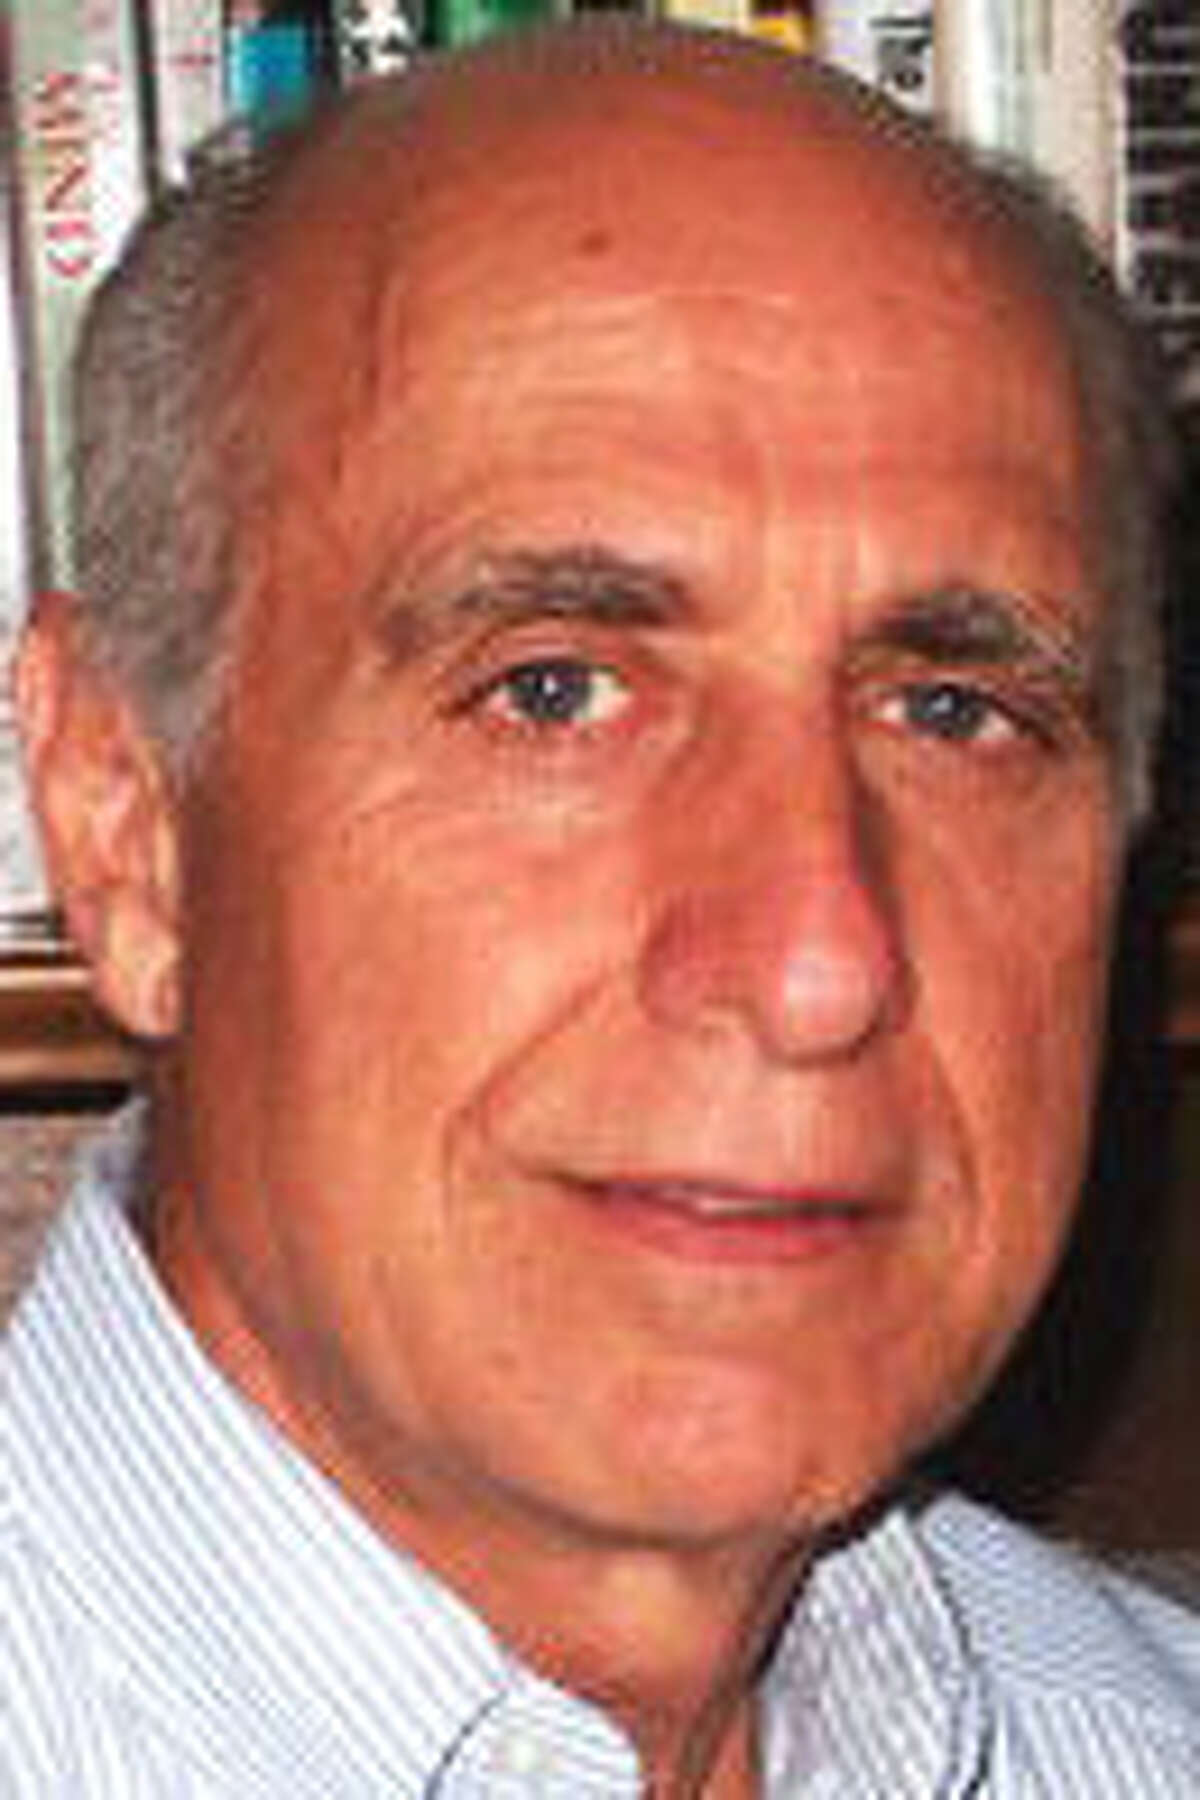 Robert Brischetto is former executive director of the Southwest Voter Research Institute.